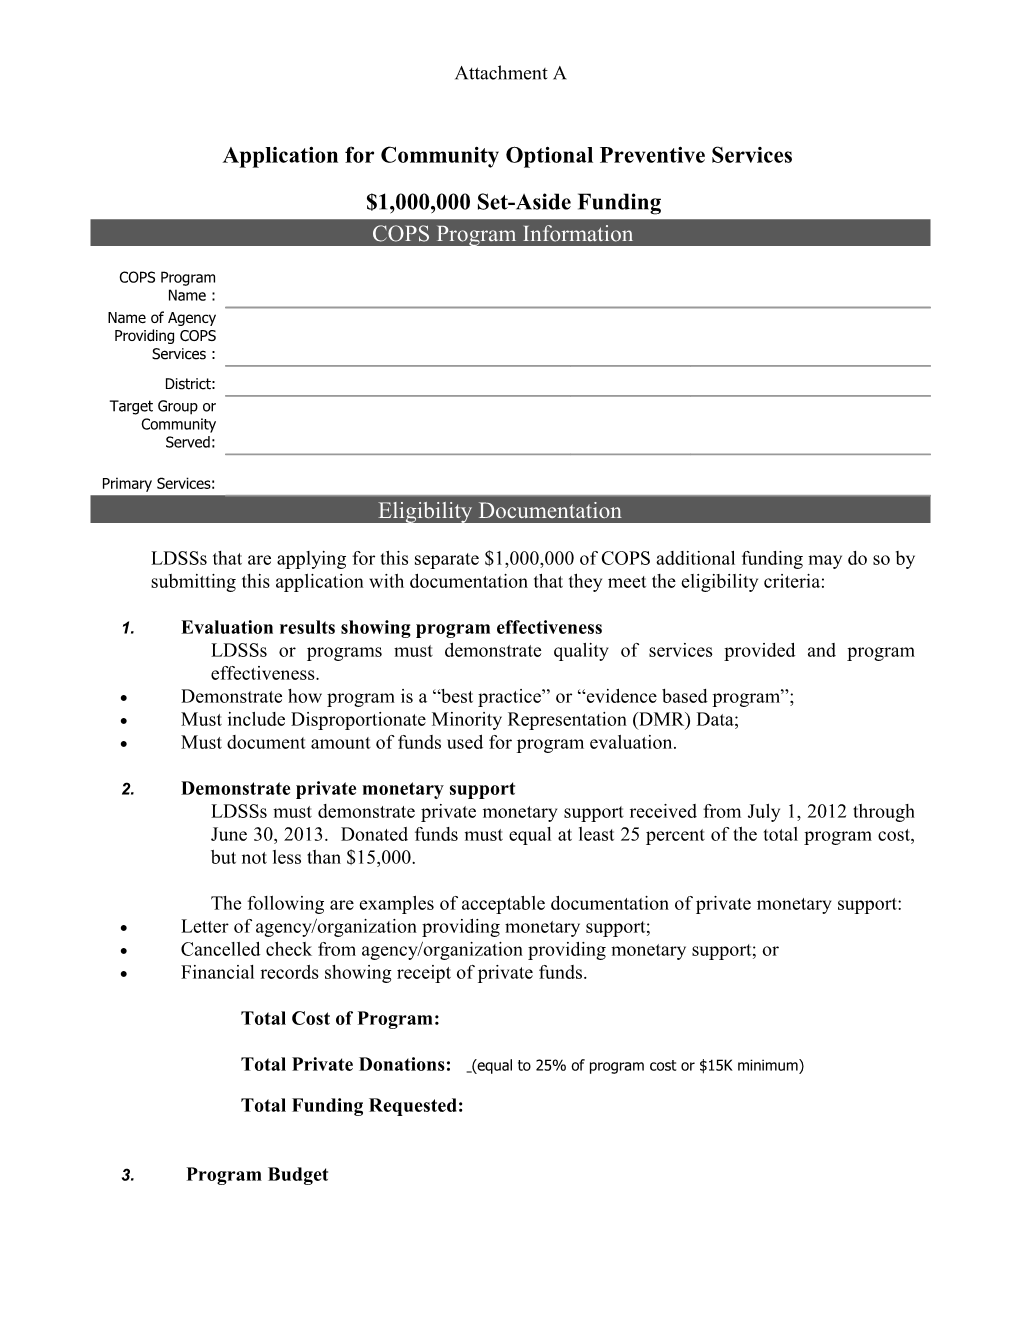 Application for Community Optional Preventive Services